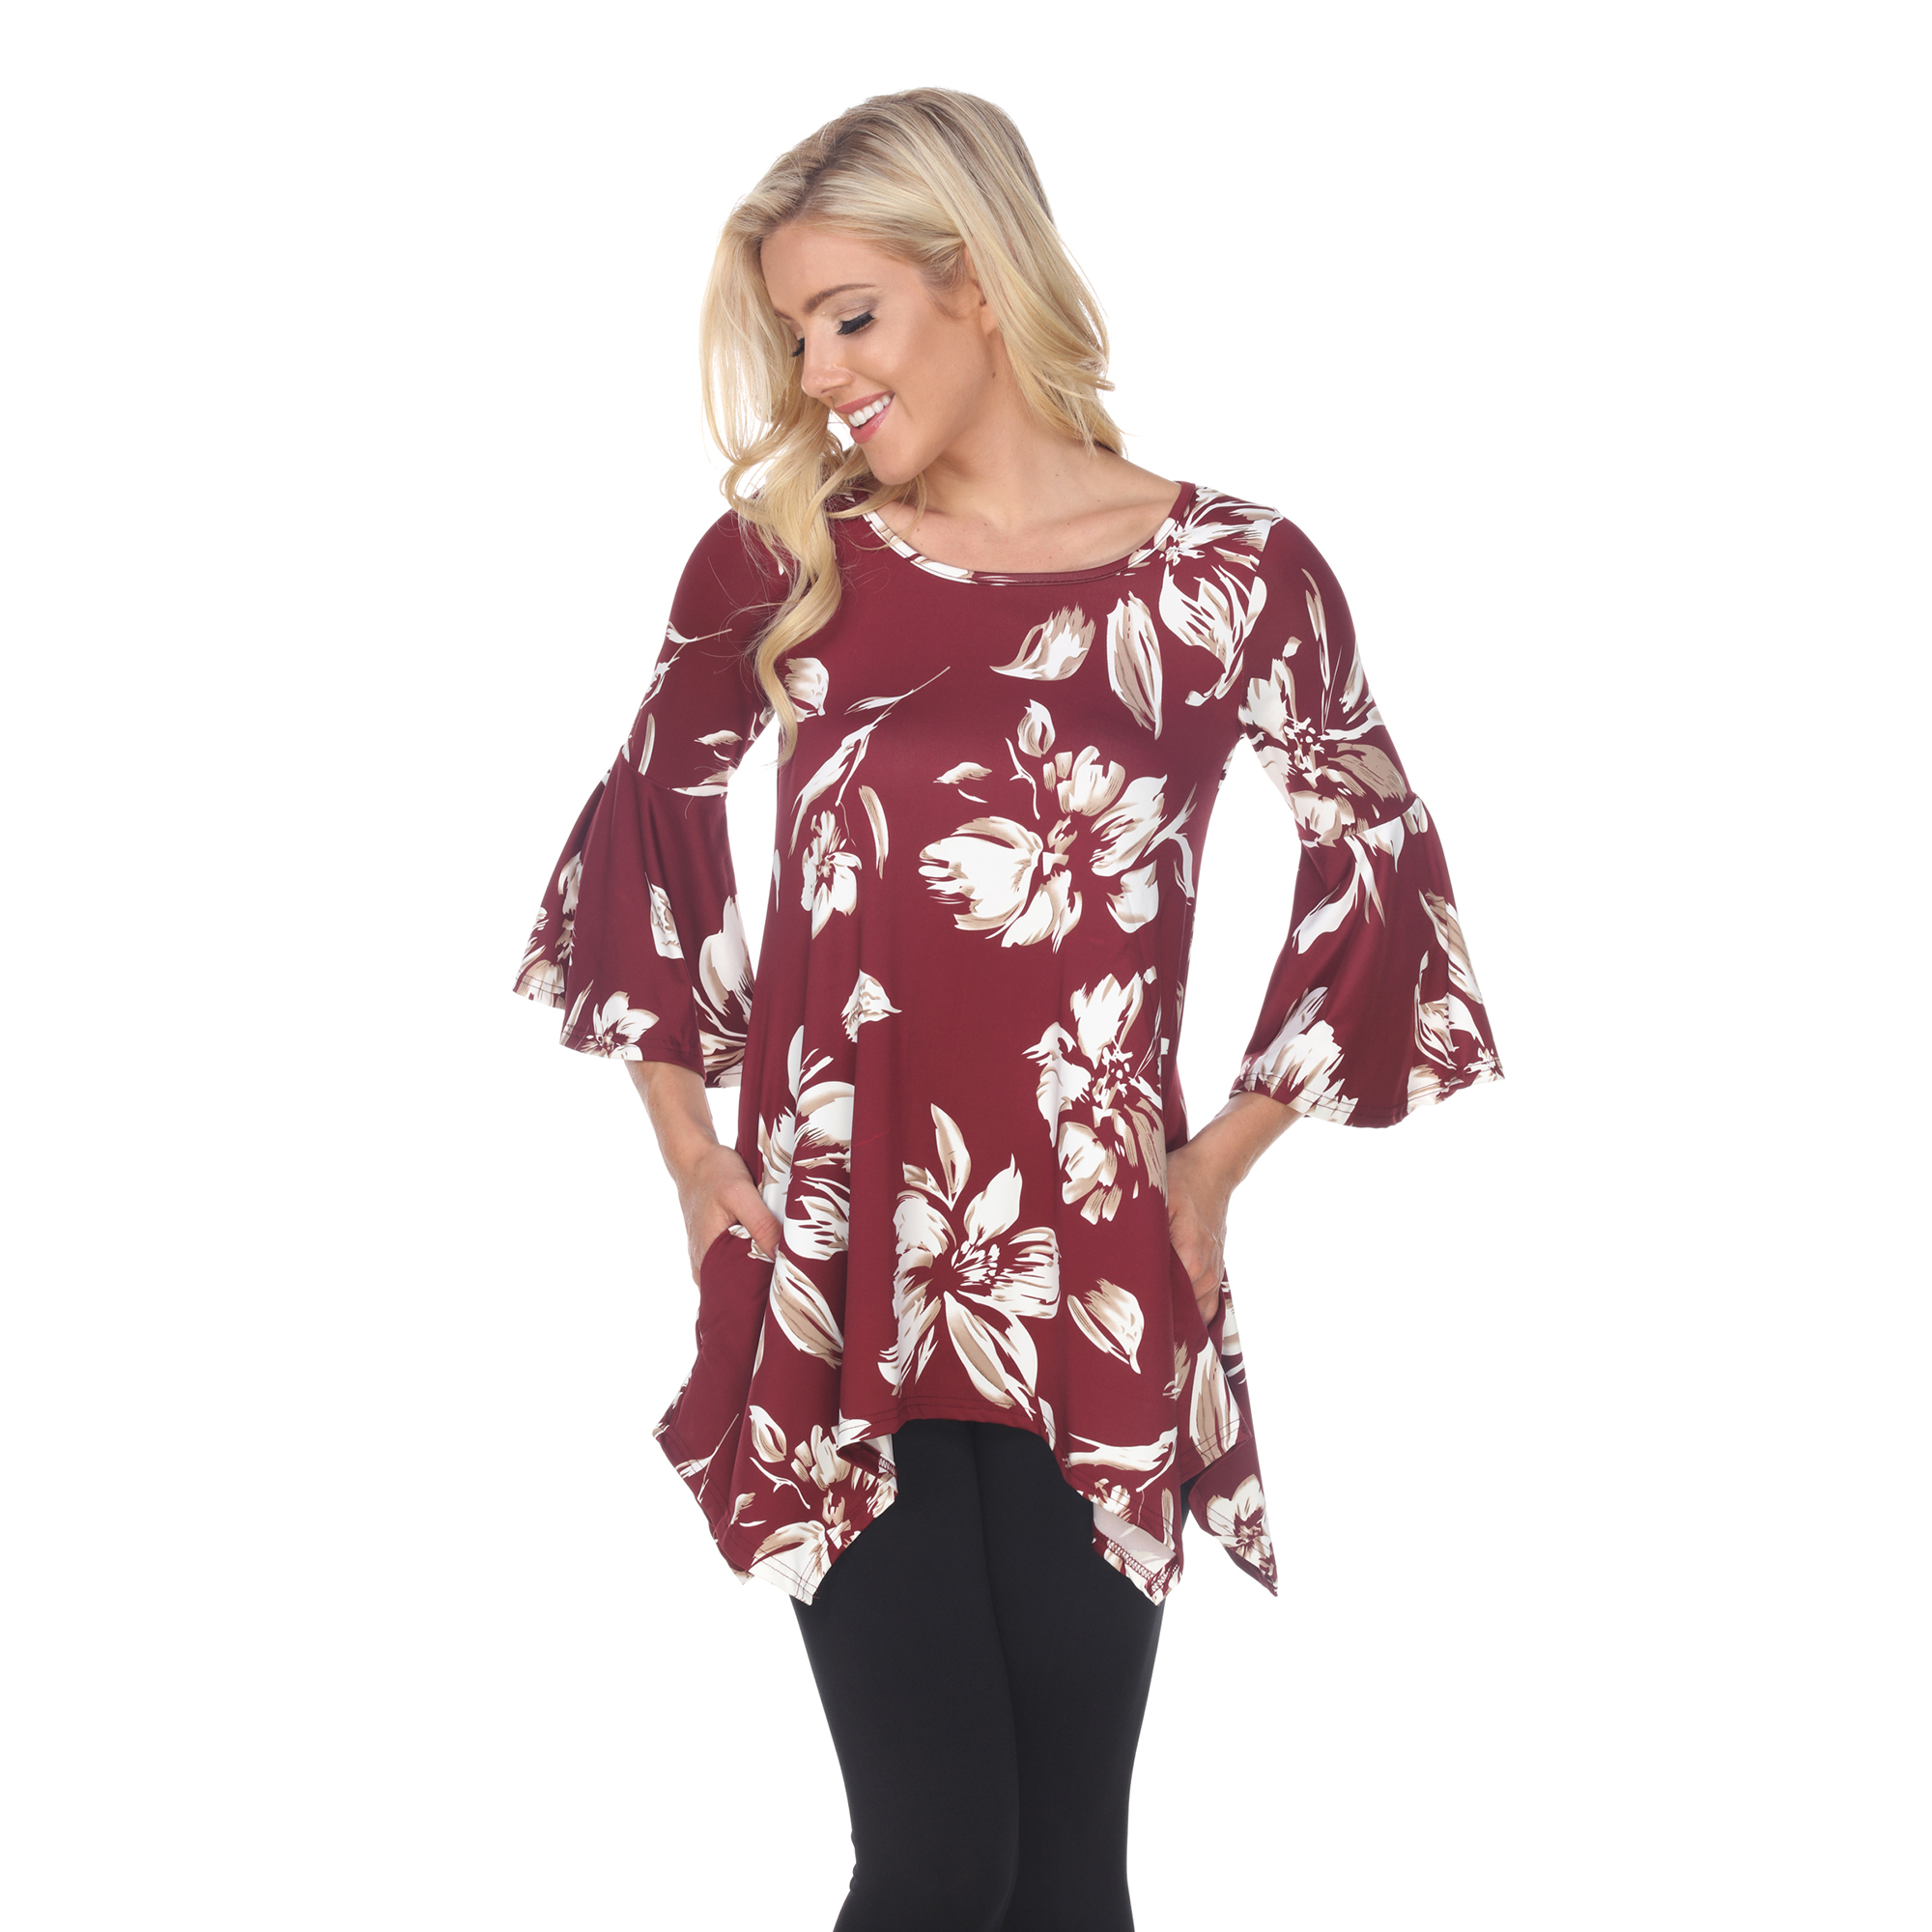 White Mark Women's Floral Print Quarter Sleeve Tunic Top With Pockets - Red, Small